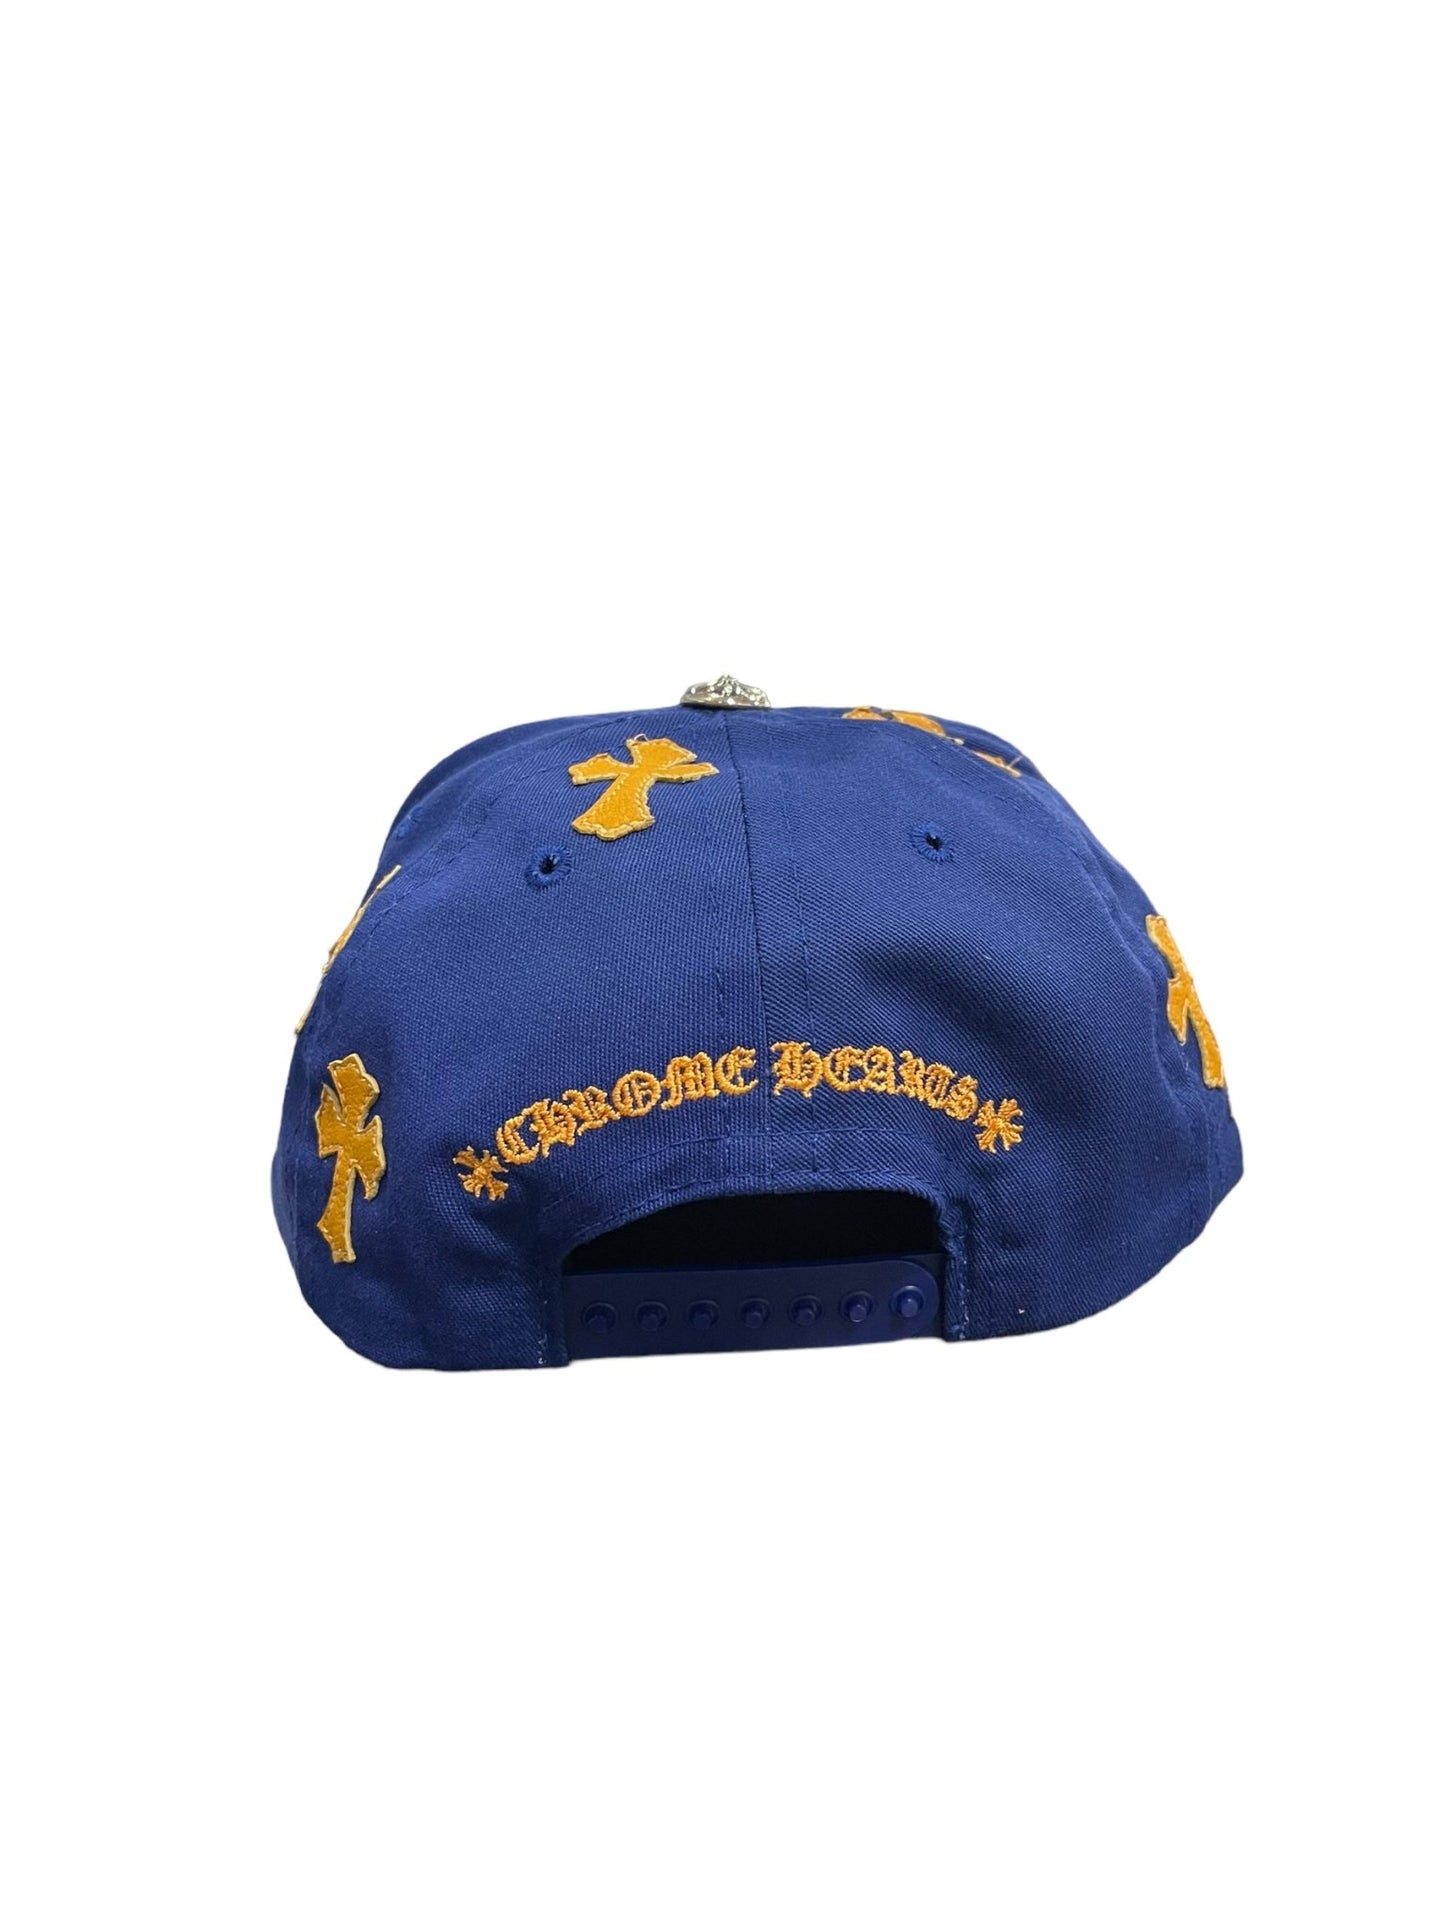 Chrome Hearts Leather Patches Snapback Hat Blue / Yellow - Sneakersbe Sneakers Sale Online